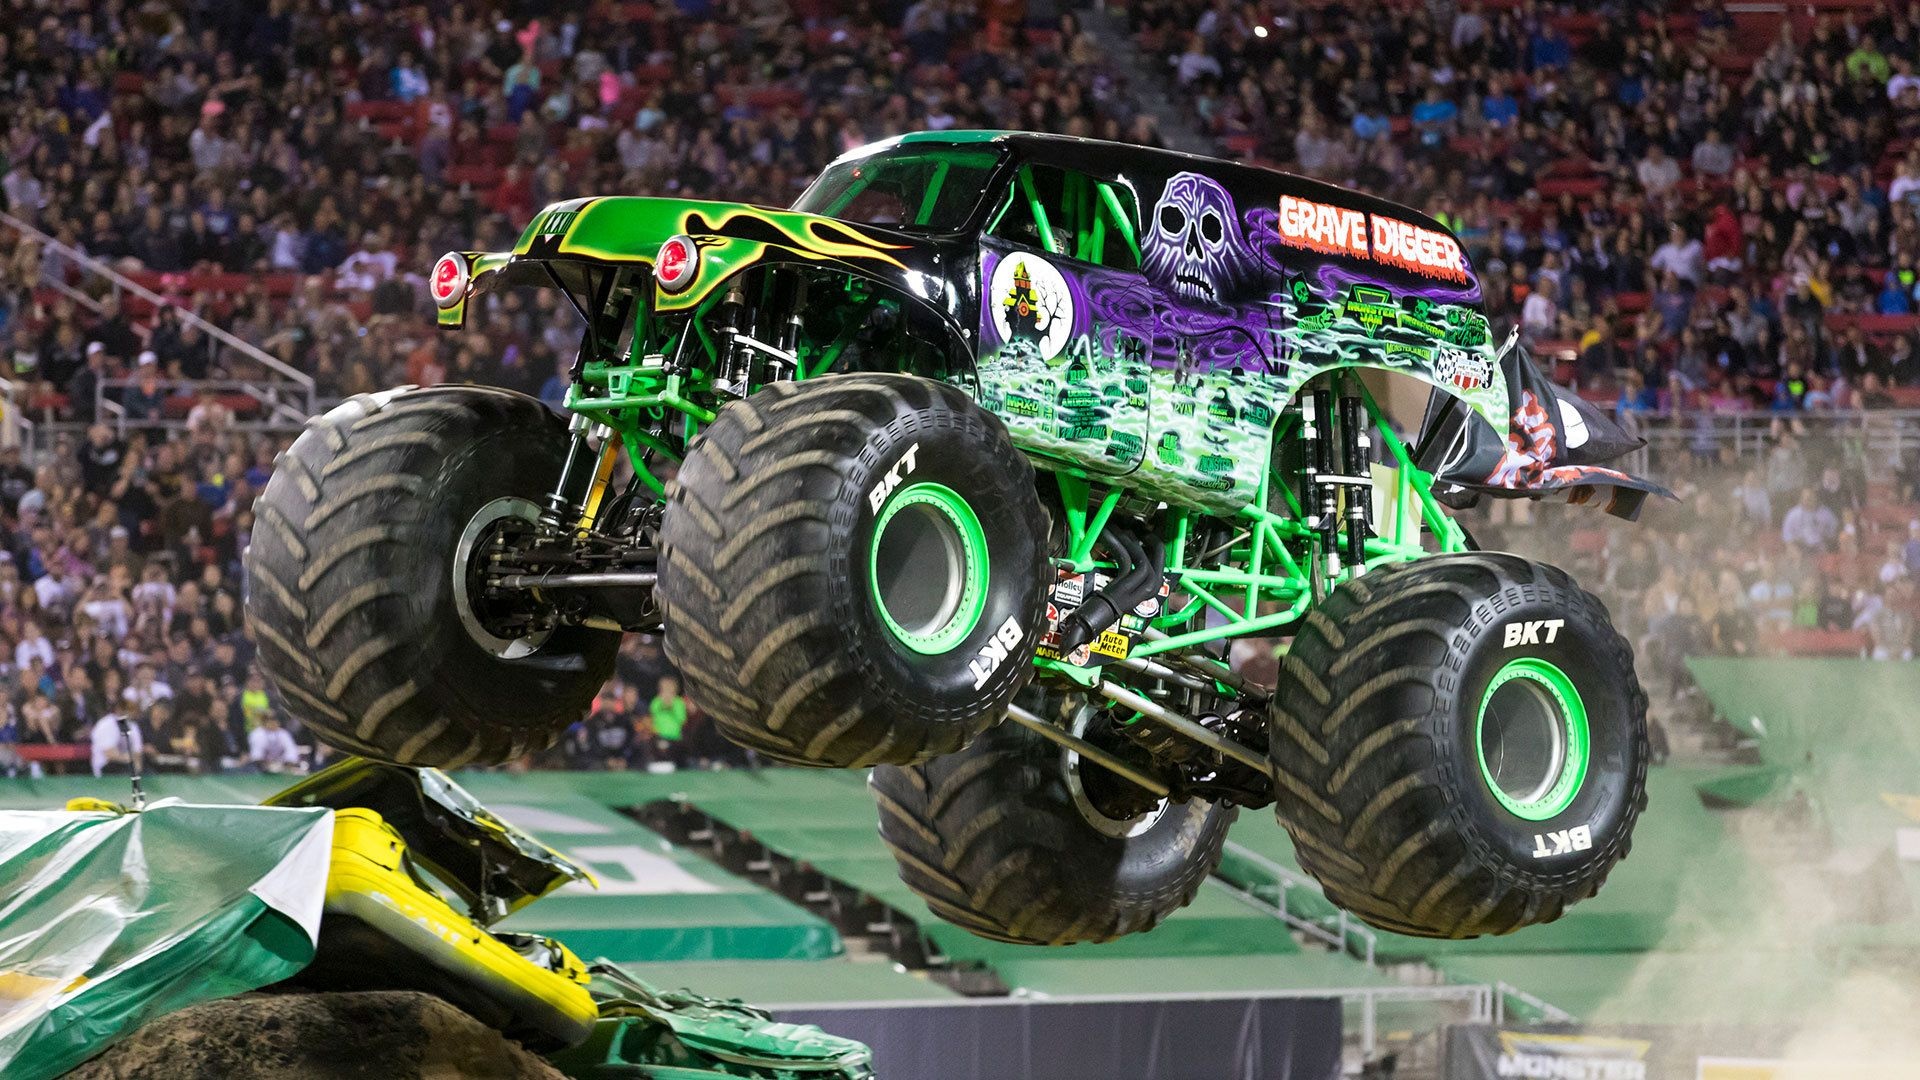 Monster Truck: Grave Digger, Damaging crashes, Oversized tires constructed for competition and entertainment uses. 1920x1080 Full HD Wallpaper.